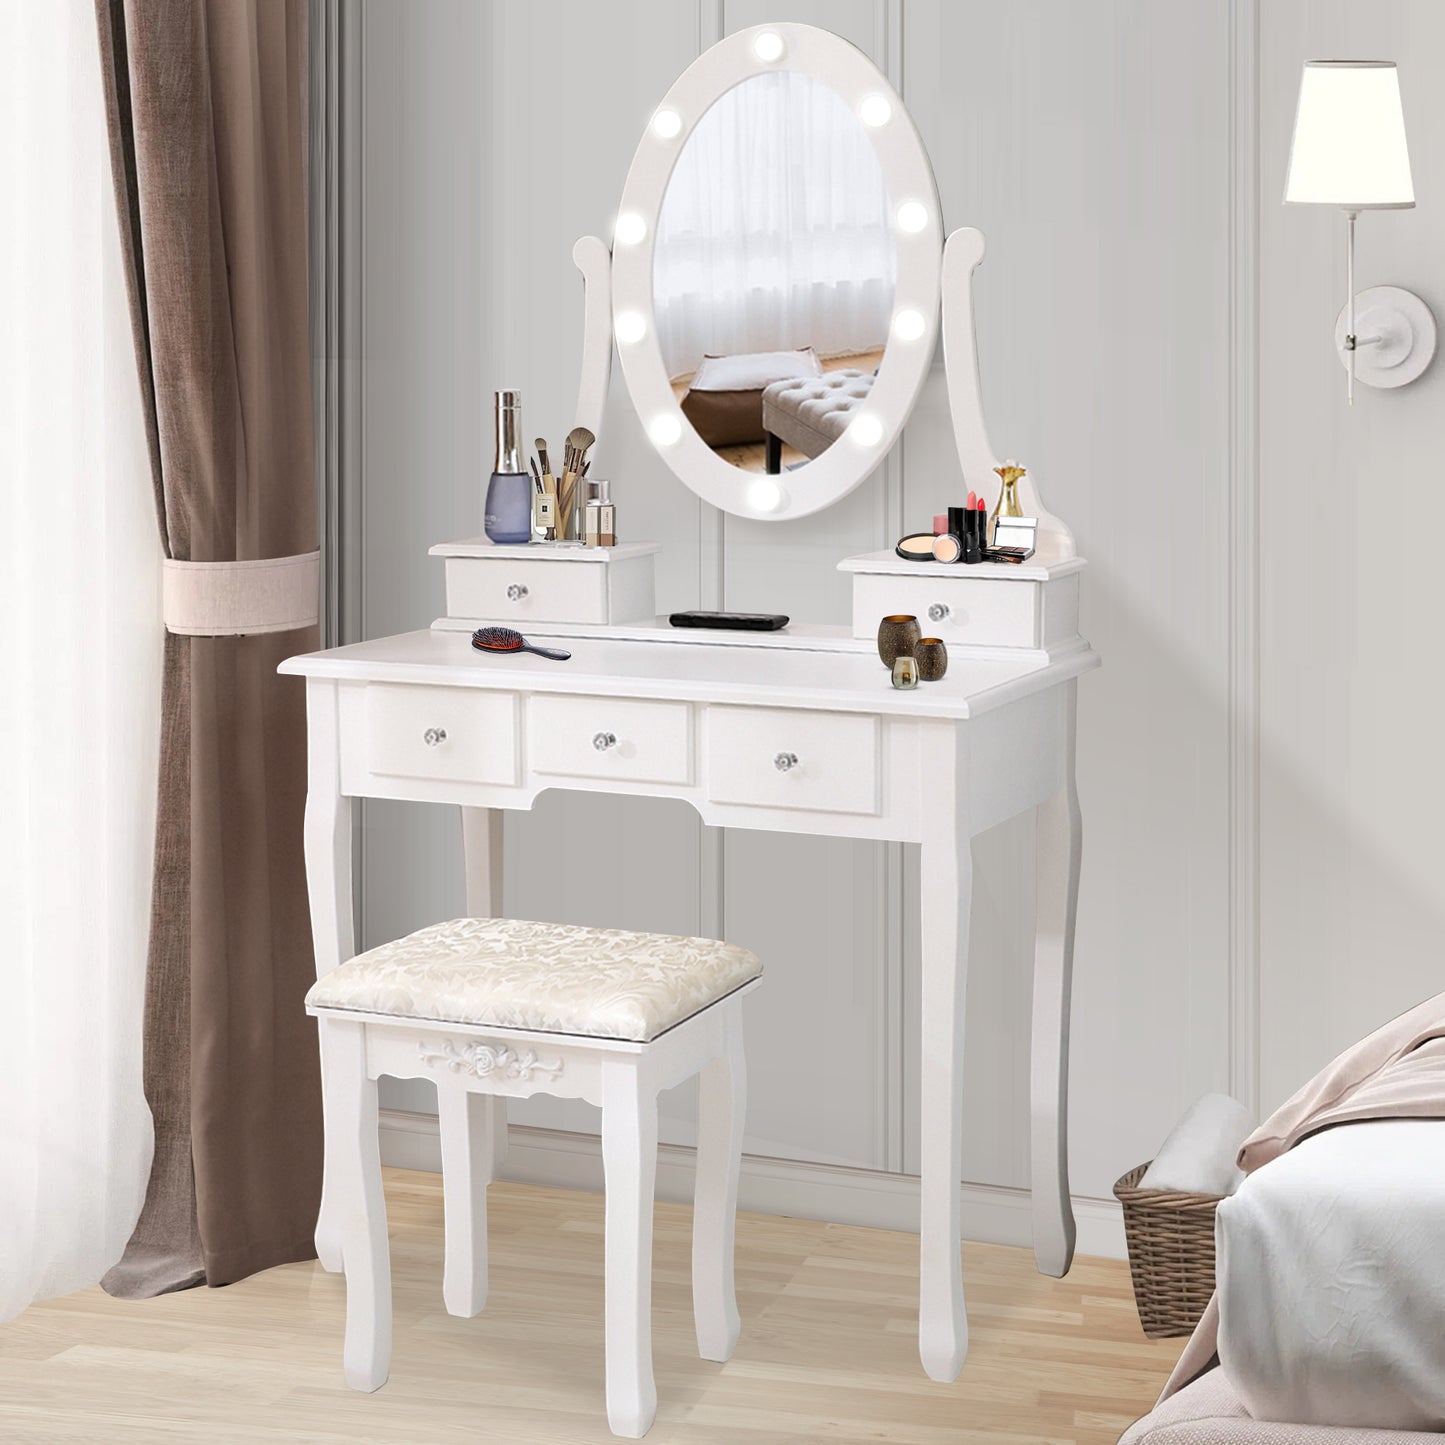 HSUNNS Vanity Set with Mirror, 2 Drawers Makeup Dressing Desk with Cushioned Stool Set, Vintage Style Makeup Vanity Table Desk with Large Mirror, Bedroom Vanities Set for Women and Girls, White